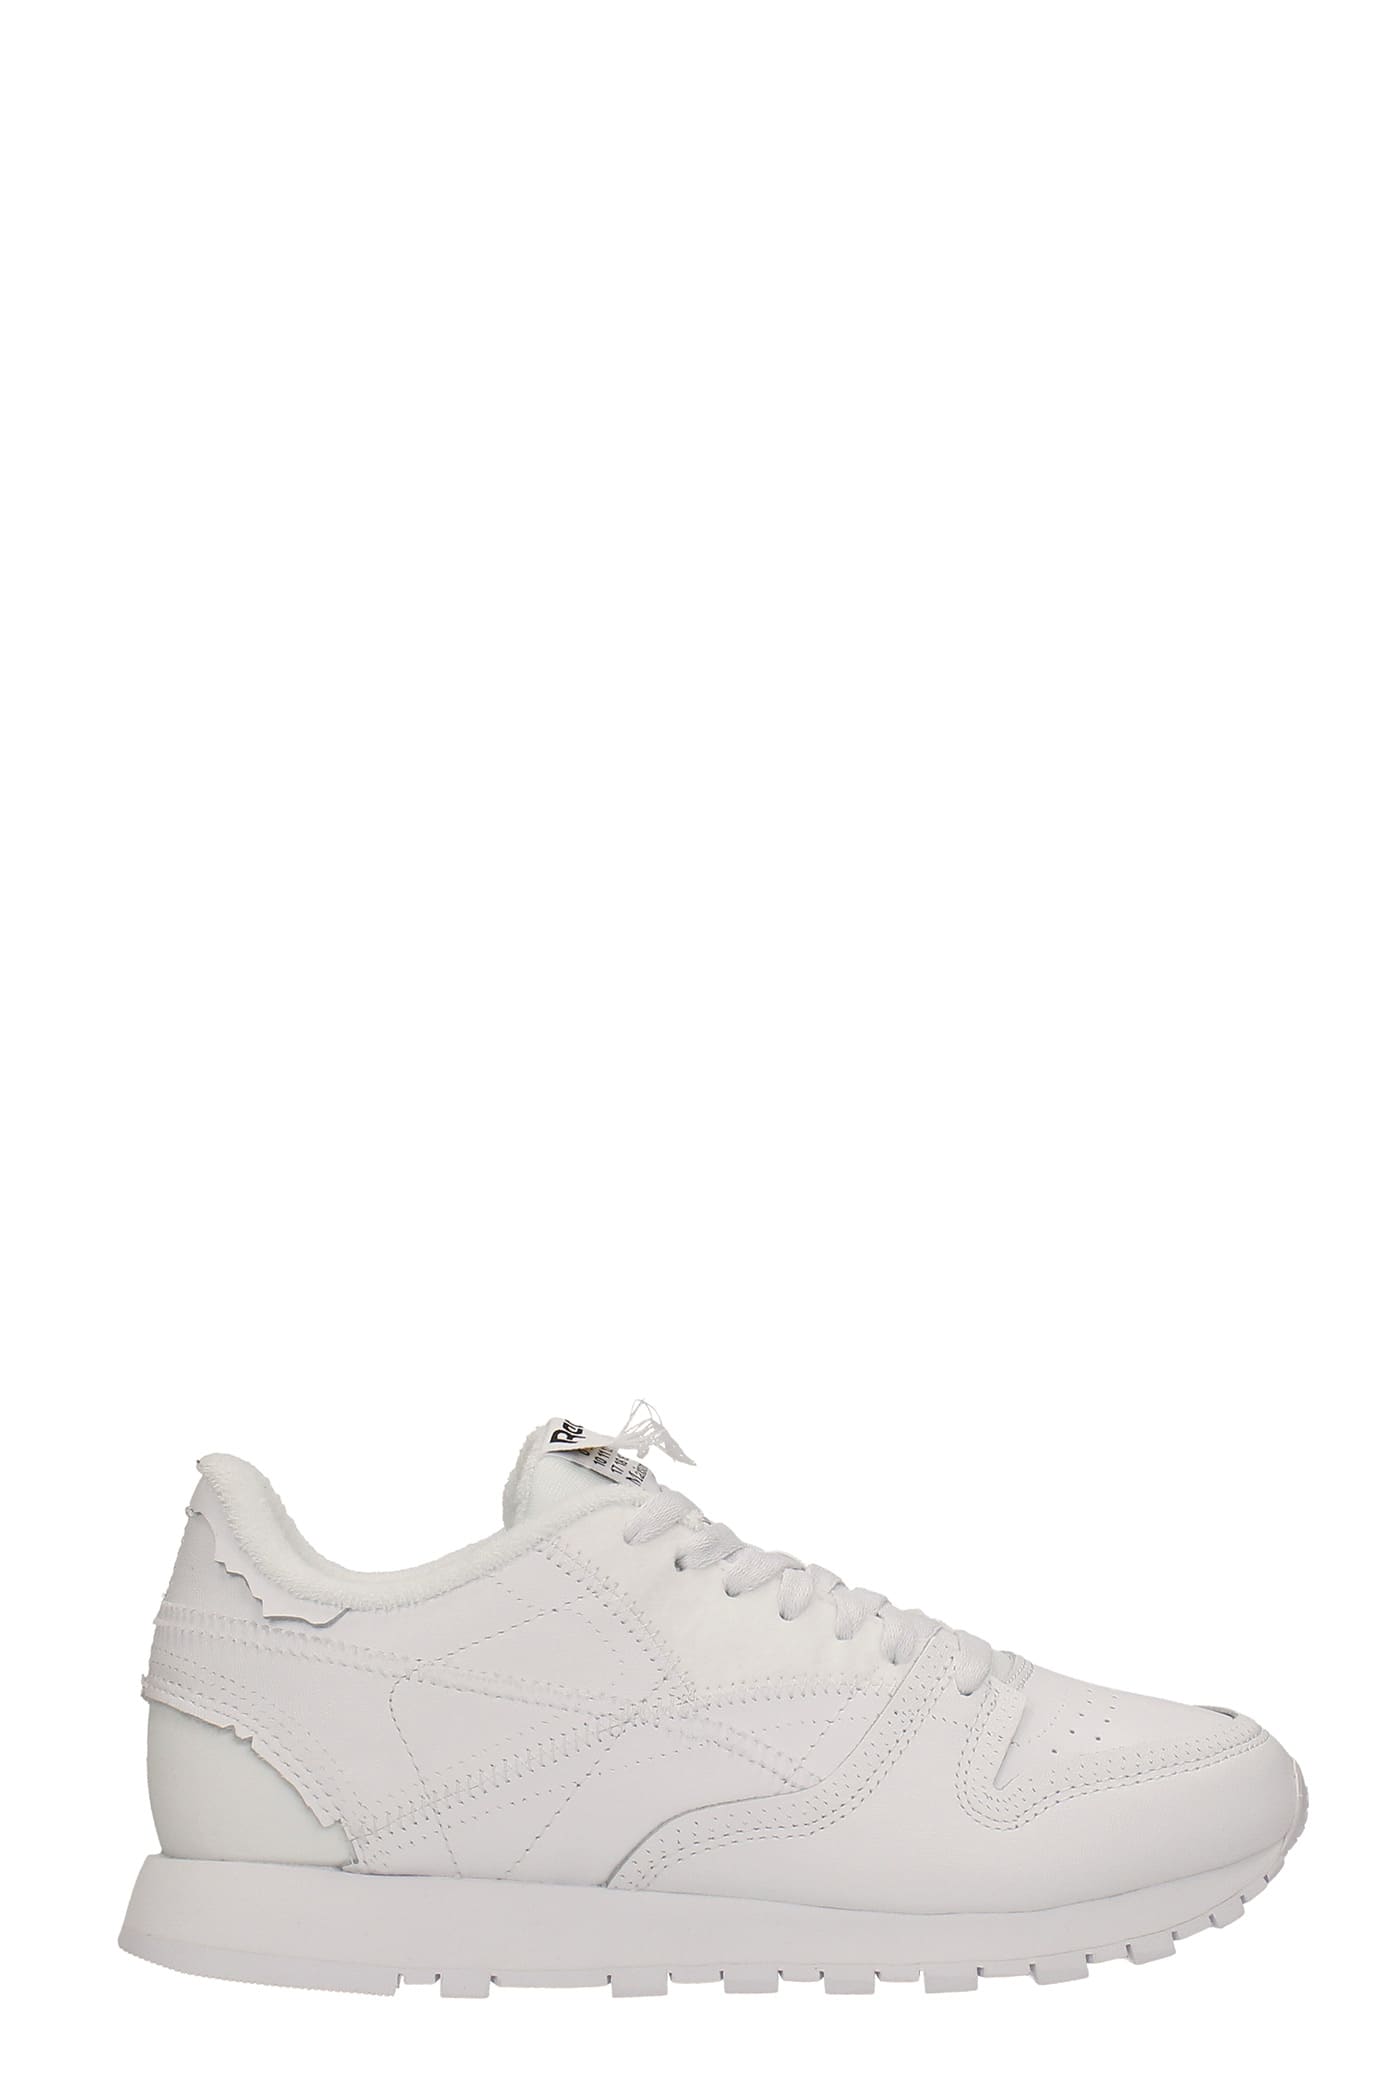 Maison Margiela Sneakers In White Suede And Leather